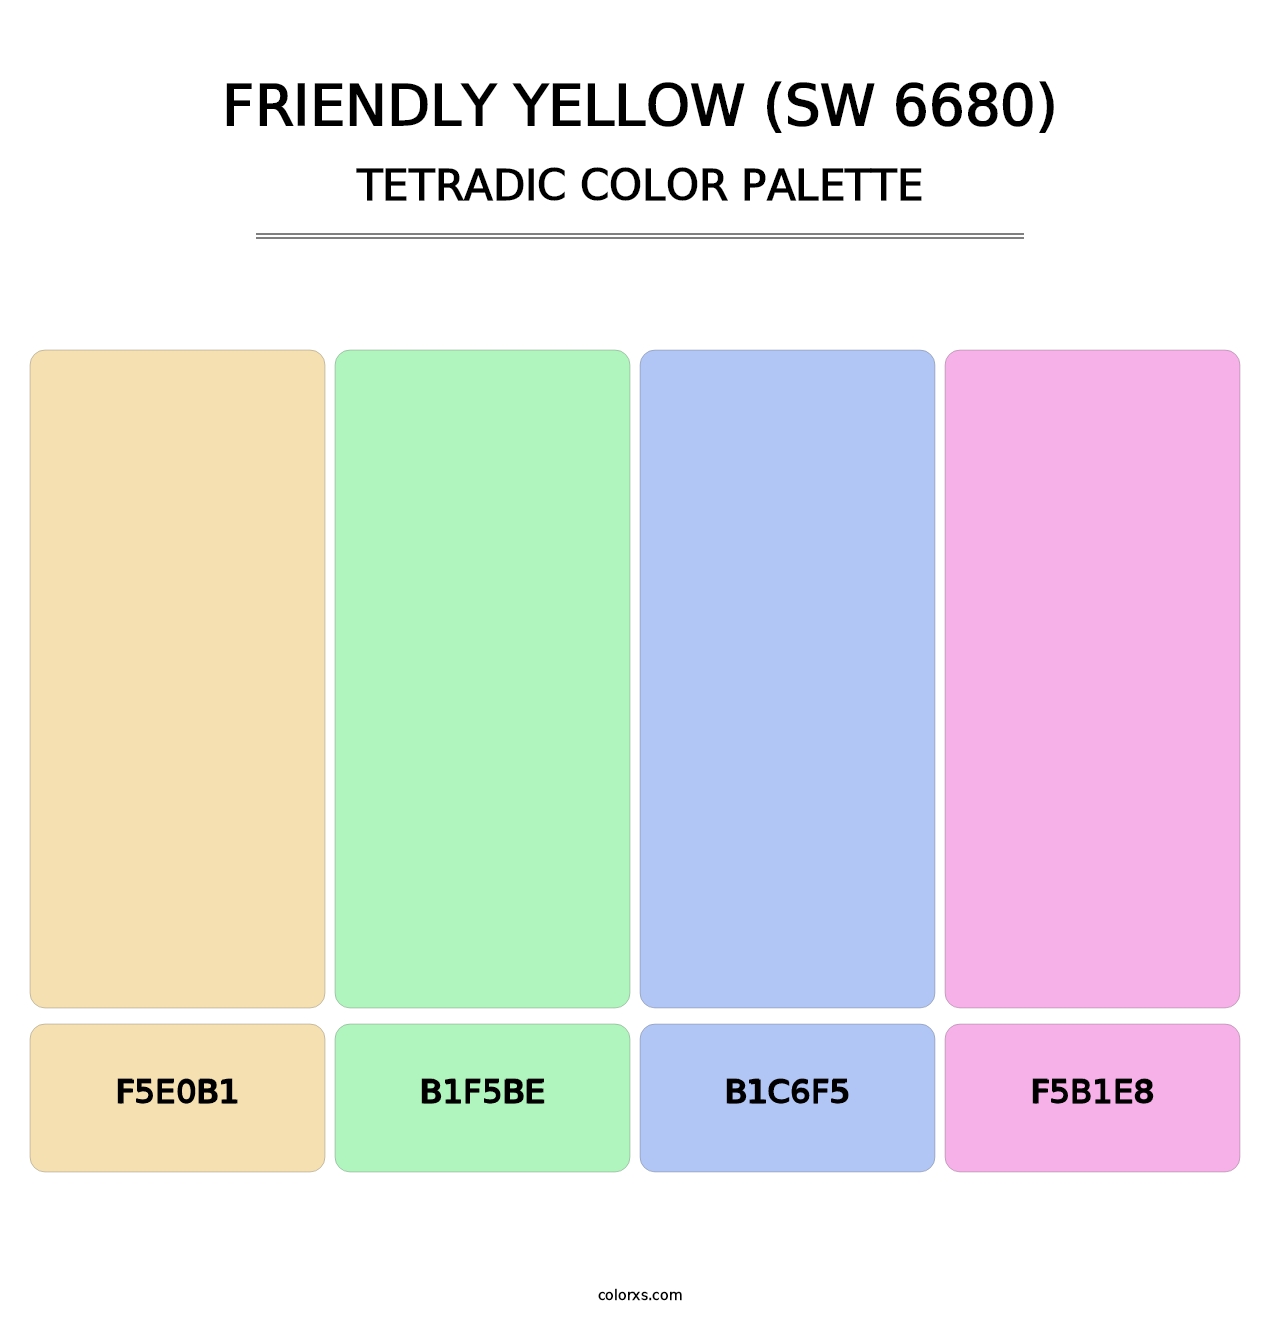 Friendly Yellow (SW 6680) - Tetradic Color Palette